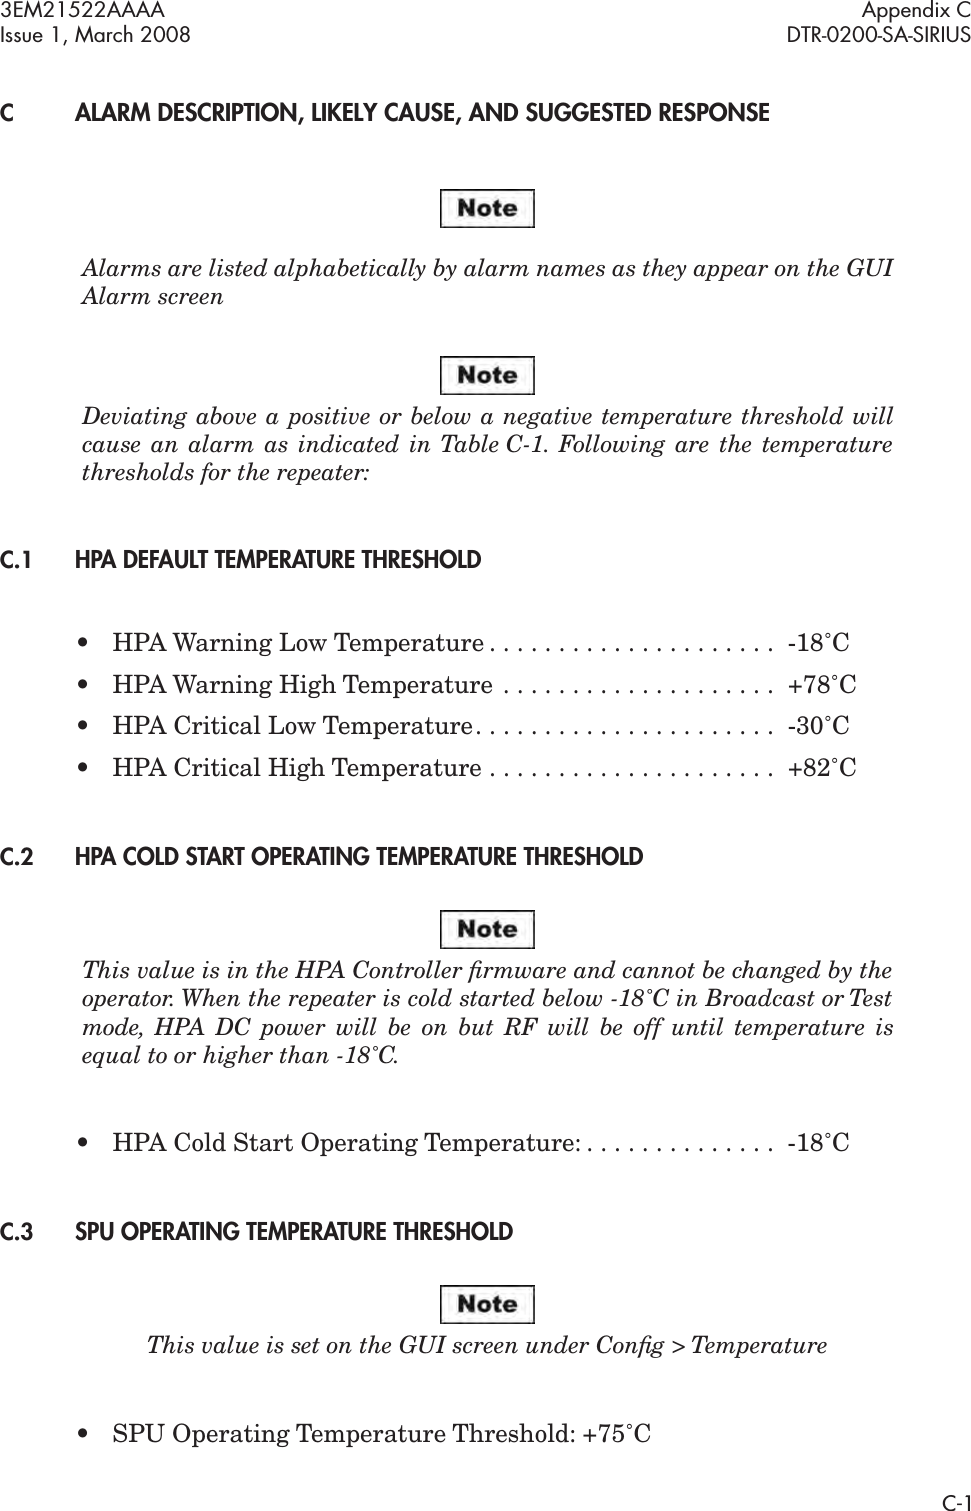 3EM21522AAAA Appendix CIssue 1, March 2008 DTR-0200-SA-SIRIUSC-1CALARM DESCRIPTION, LIKELY CAUSE, AND SUGGESTED RESPONSEAlarms are listed alphabetically by alarm names as they appear on the GUI Alarm screenDeviating above a positive or below a negative temperature threshold will cause an alarm as indicated in Table C-1. Following are the temperature thresholds for the repeater: C.1HPA DEFAULT TEMPERATURE THRESHOLD• HPA Warning Low Temperature . . . . . . . . . . . . . . . . . . . . .  -18˚C• HPA Warning High Temperature  . . . . . . . . . . . . . . . . . . . .  +78˚C• HPA Critical Low Temperature. . . . . . . . . . . . . . . . . . . . . .  -30˚C• HPA Critical High Temperature . . . . . . . . . . . . . . . . . . . . .  +82˚CC.2HPA COLD START OPERATING TEMPERATURE THRESHOLDThis value is in the HPA Controller ﬁrmware and cannot be changed by the operator. When the repeater is cold started below -18˚C in Broadcast or Test mode, HPA DC power will be on but RF will be off until temperature is equal to or higher than -18˚C. • HPA Cold Start Operating Temperature: . . . . . . . . . . . . . .  -18˚CC.3SPU OPERATING TEMPERATURE THRESHOLDThis value is set on the GUI screen under Conﬁg &gt; Temperature•SPU Operating Temperature Threshold: +75˚C